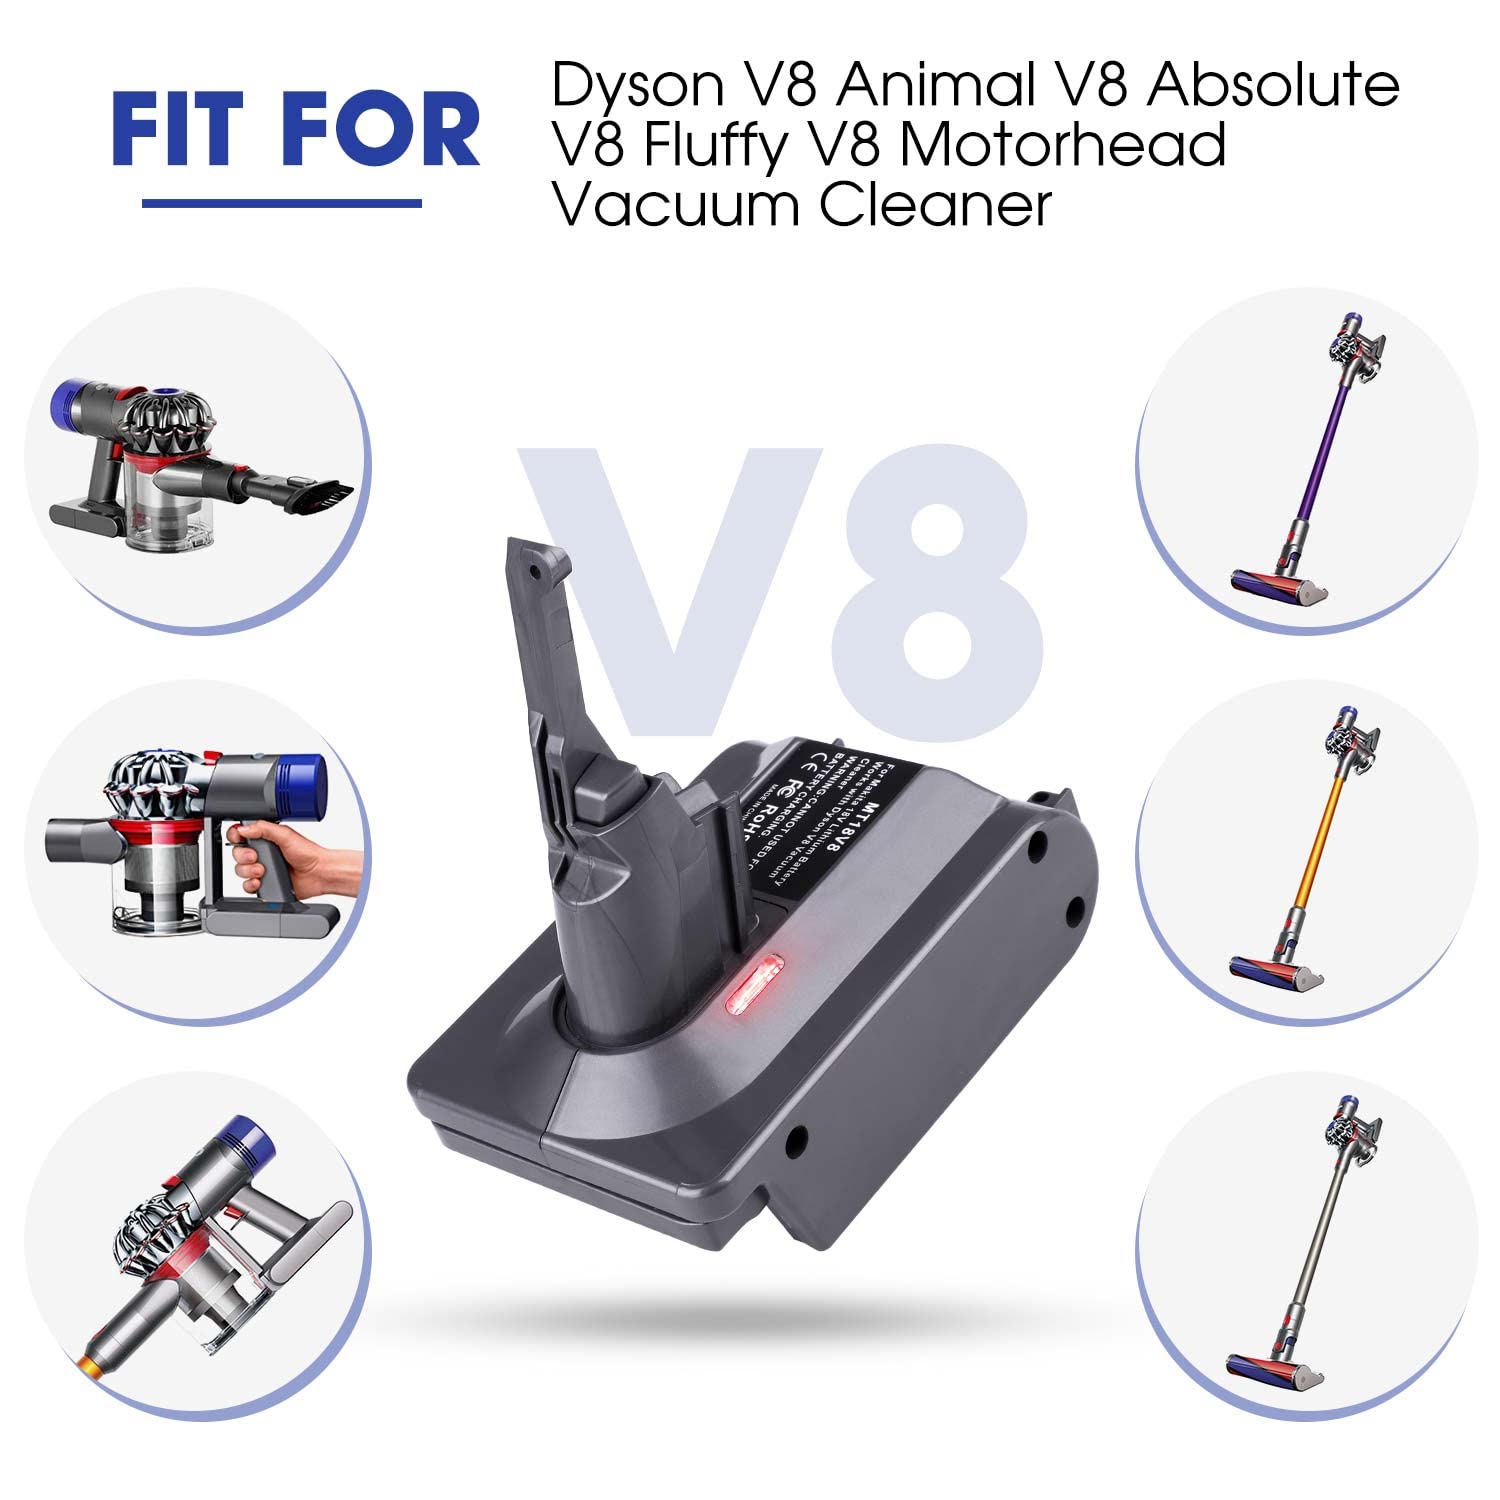 EID V8 Adapter for Dyson V8 Battery,for Makita 18V Battery Compatible for Dyson V8 Series Animal Absolute V8 Fluffy Cordless Stick and Handheld Vacuum Cleaner(Adapter ONLY)